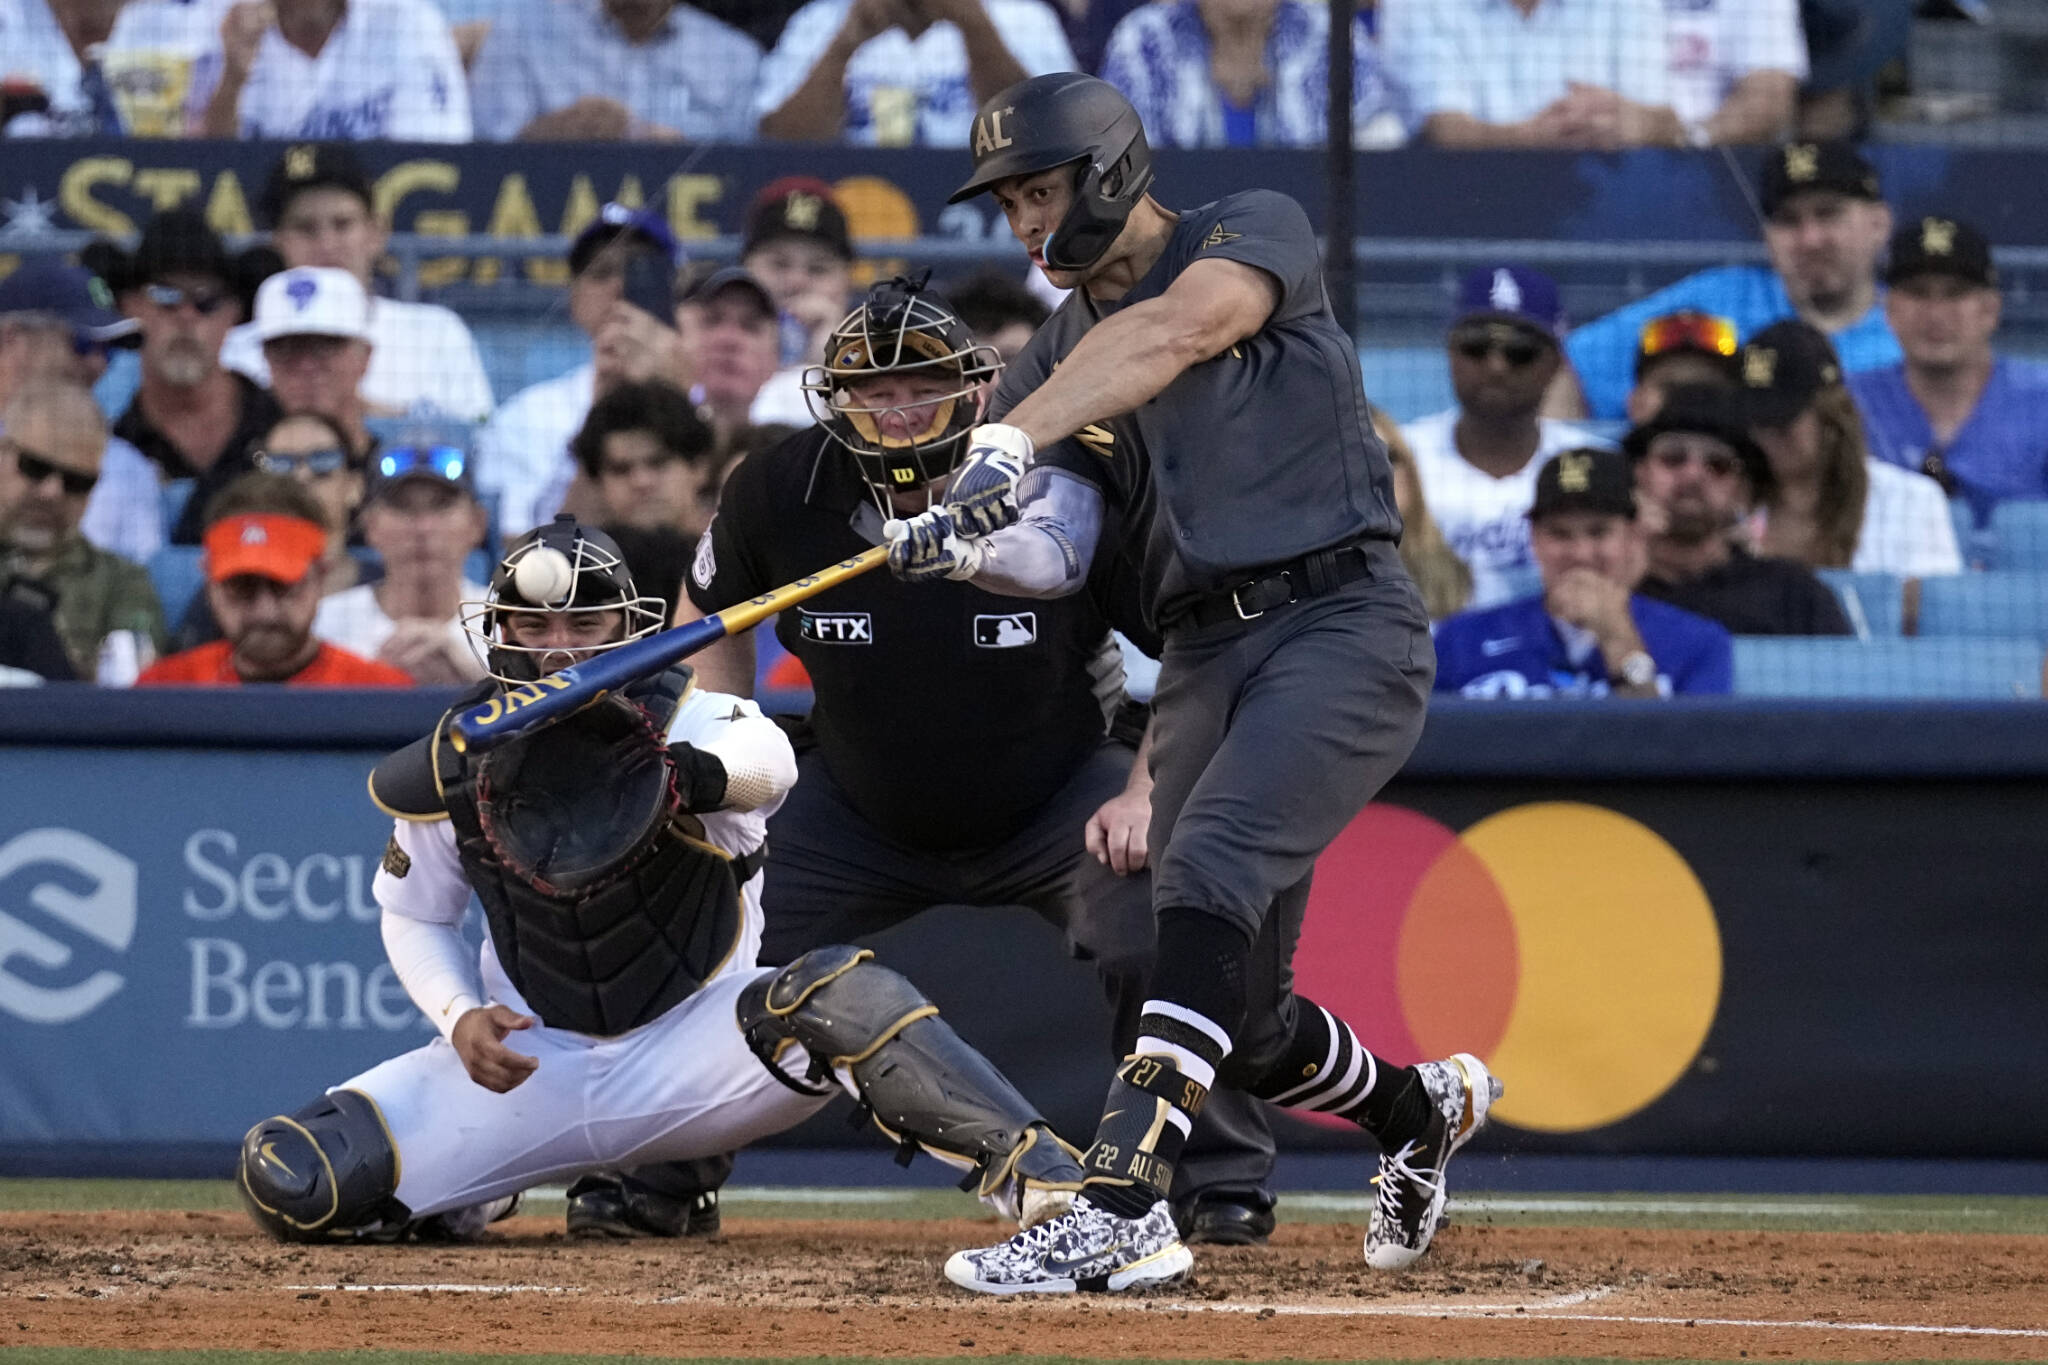 The American League’s Giancarlo Stanton, of the New York Yankees, connects for a two-run home run during the fourth inning of the MLB All-Star Game on Tuesday in Los Angeles. (AP Photo/Jae C. Hong)